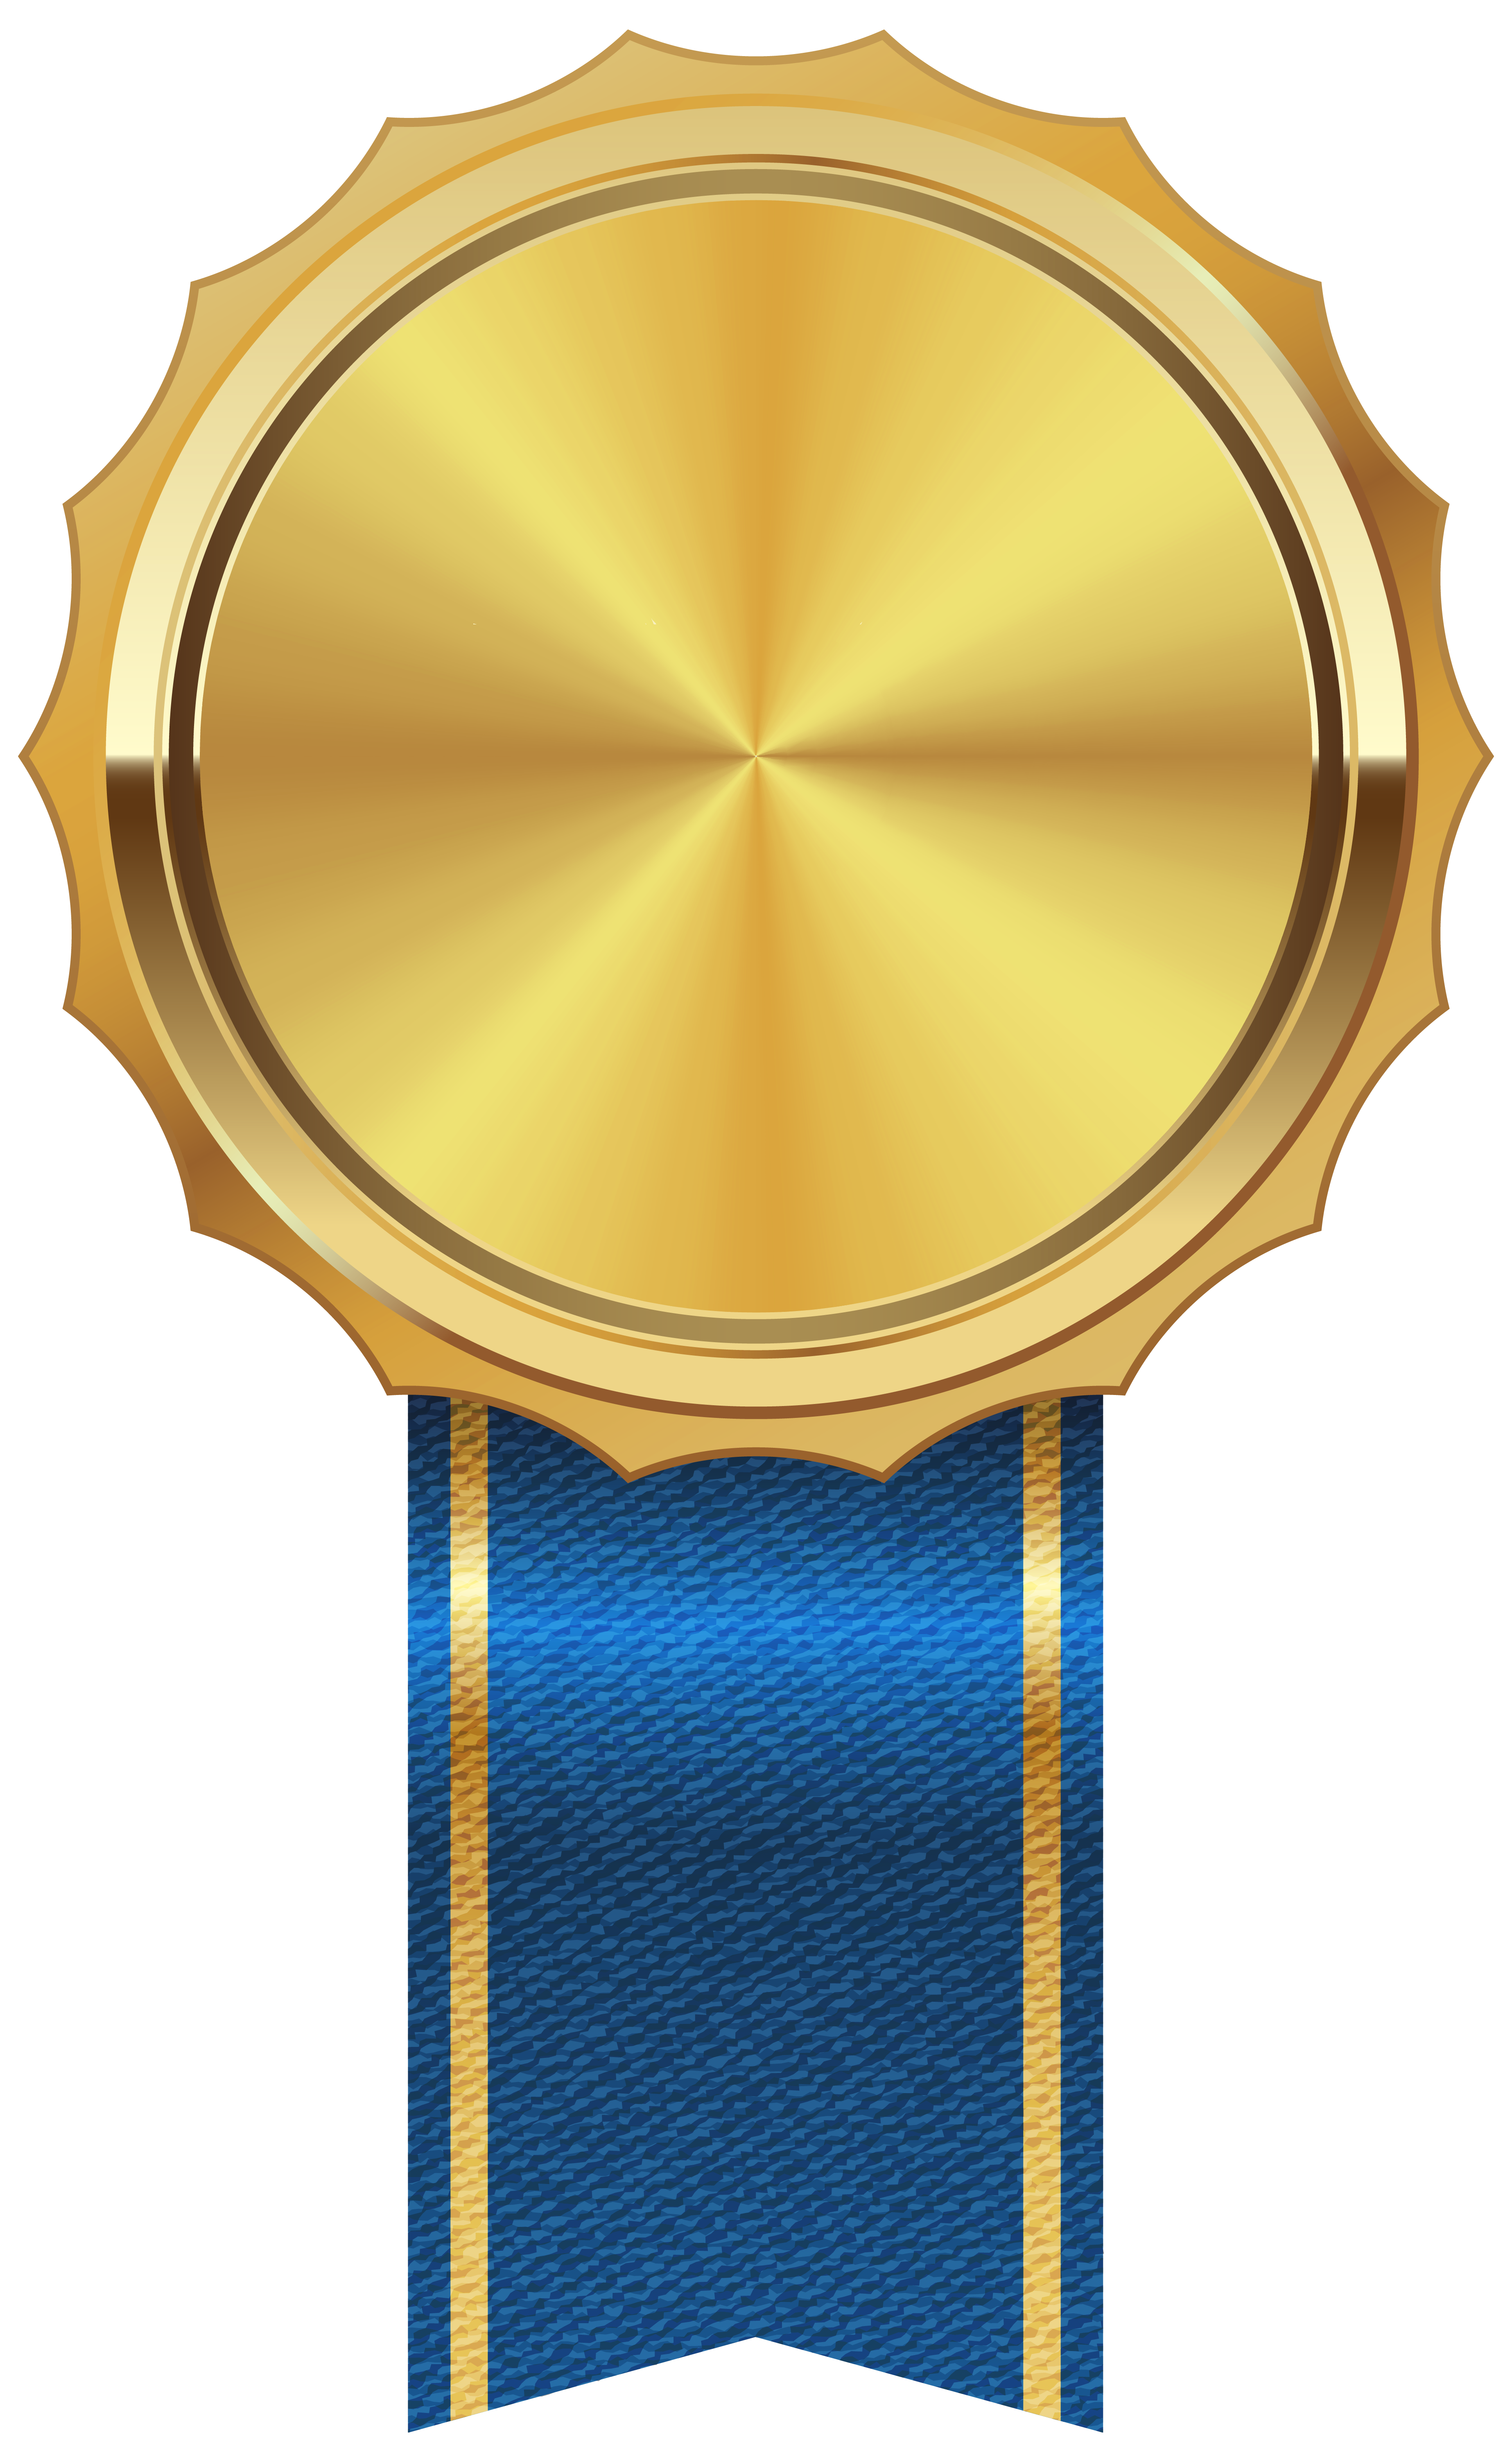 Gold Medal with Blue Ribbon PNG Clipart Image